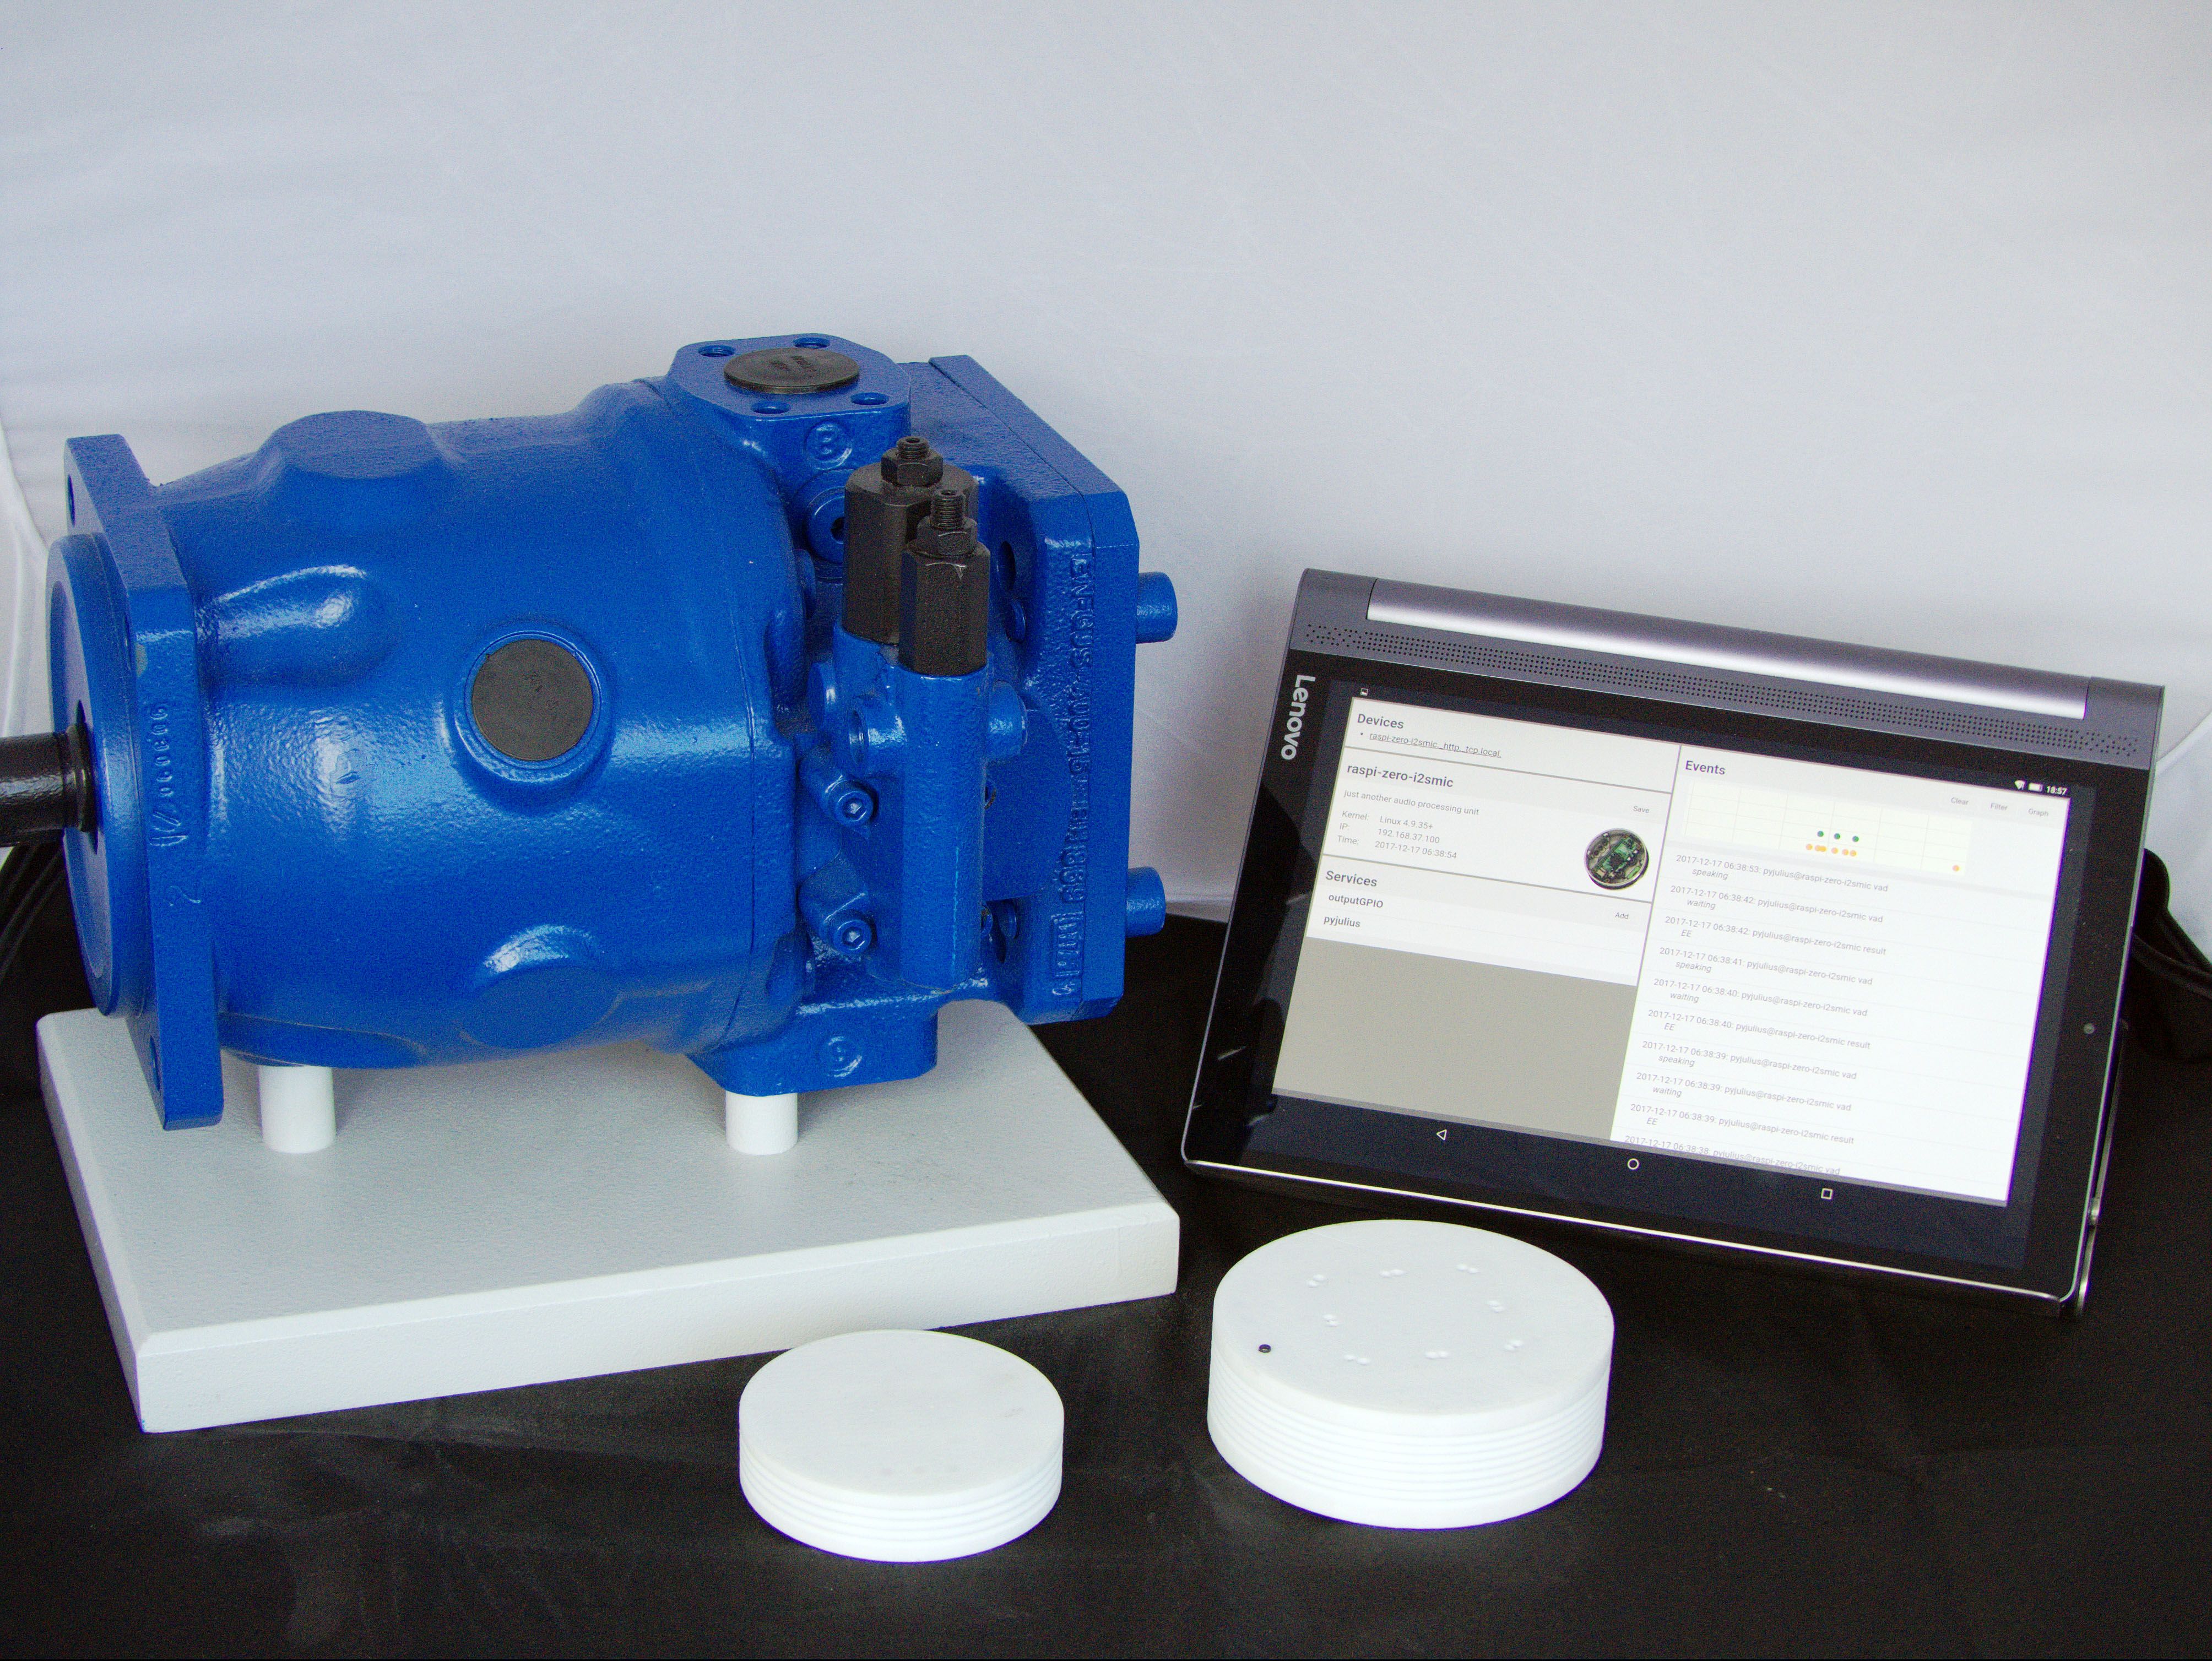 Demonstrator Hanover Trade Fair: configured wireless sensor nodes (in the foreground) send status messages of the axial piston pump (left) to a tablet.